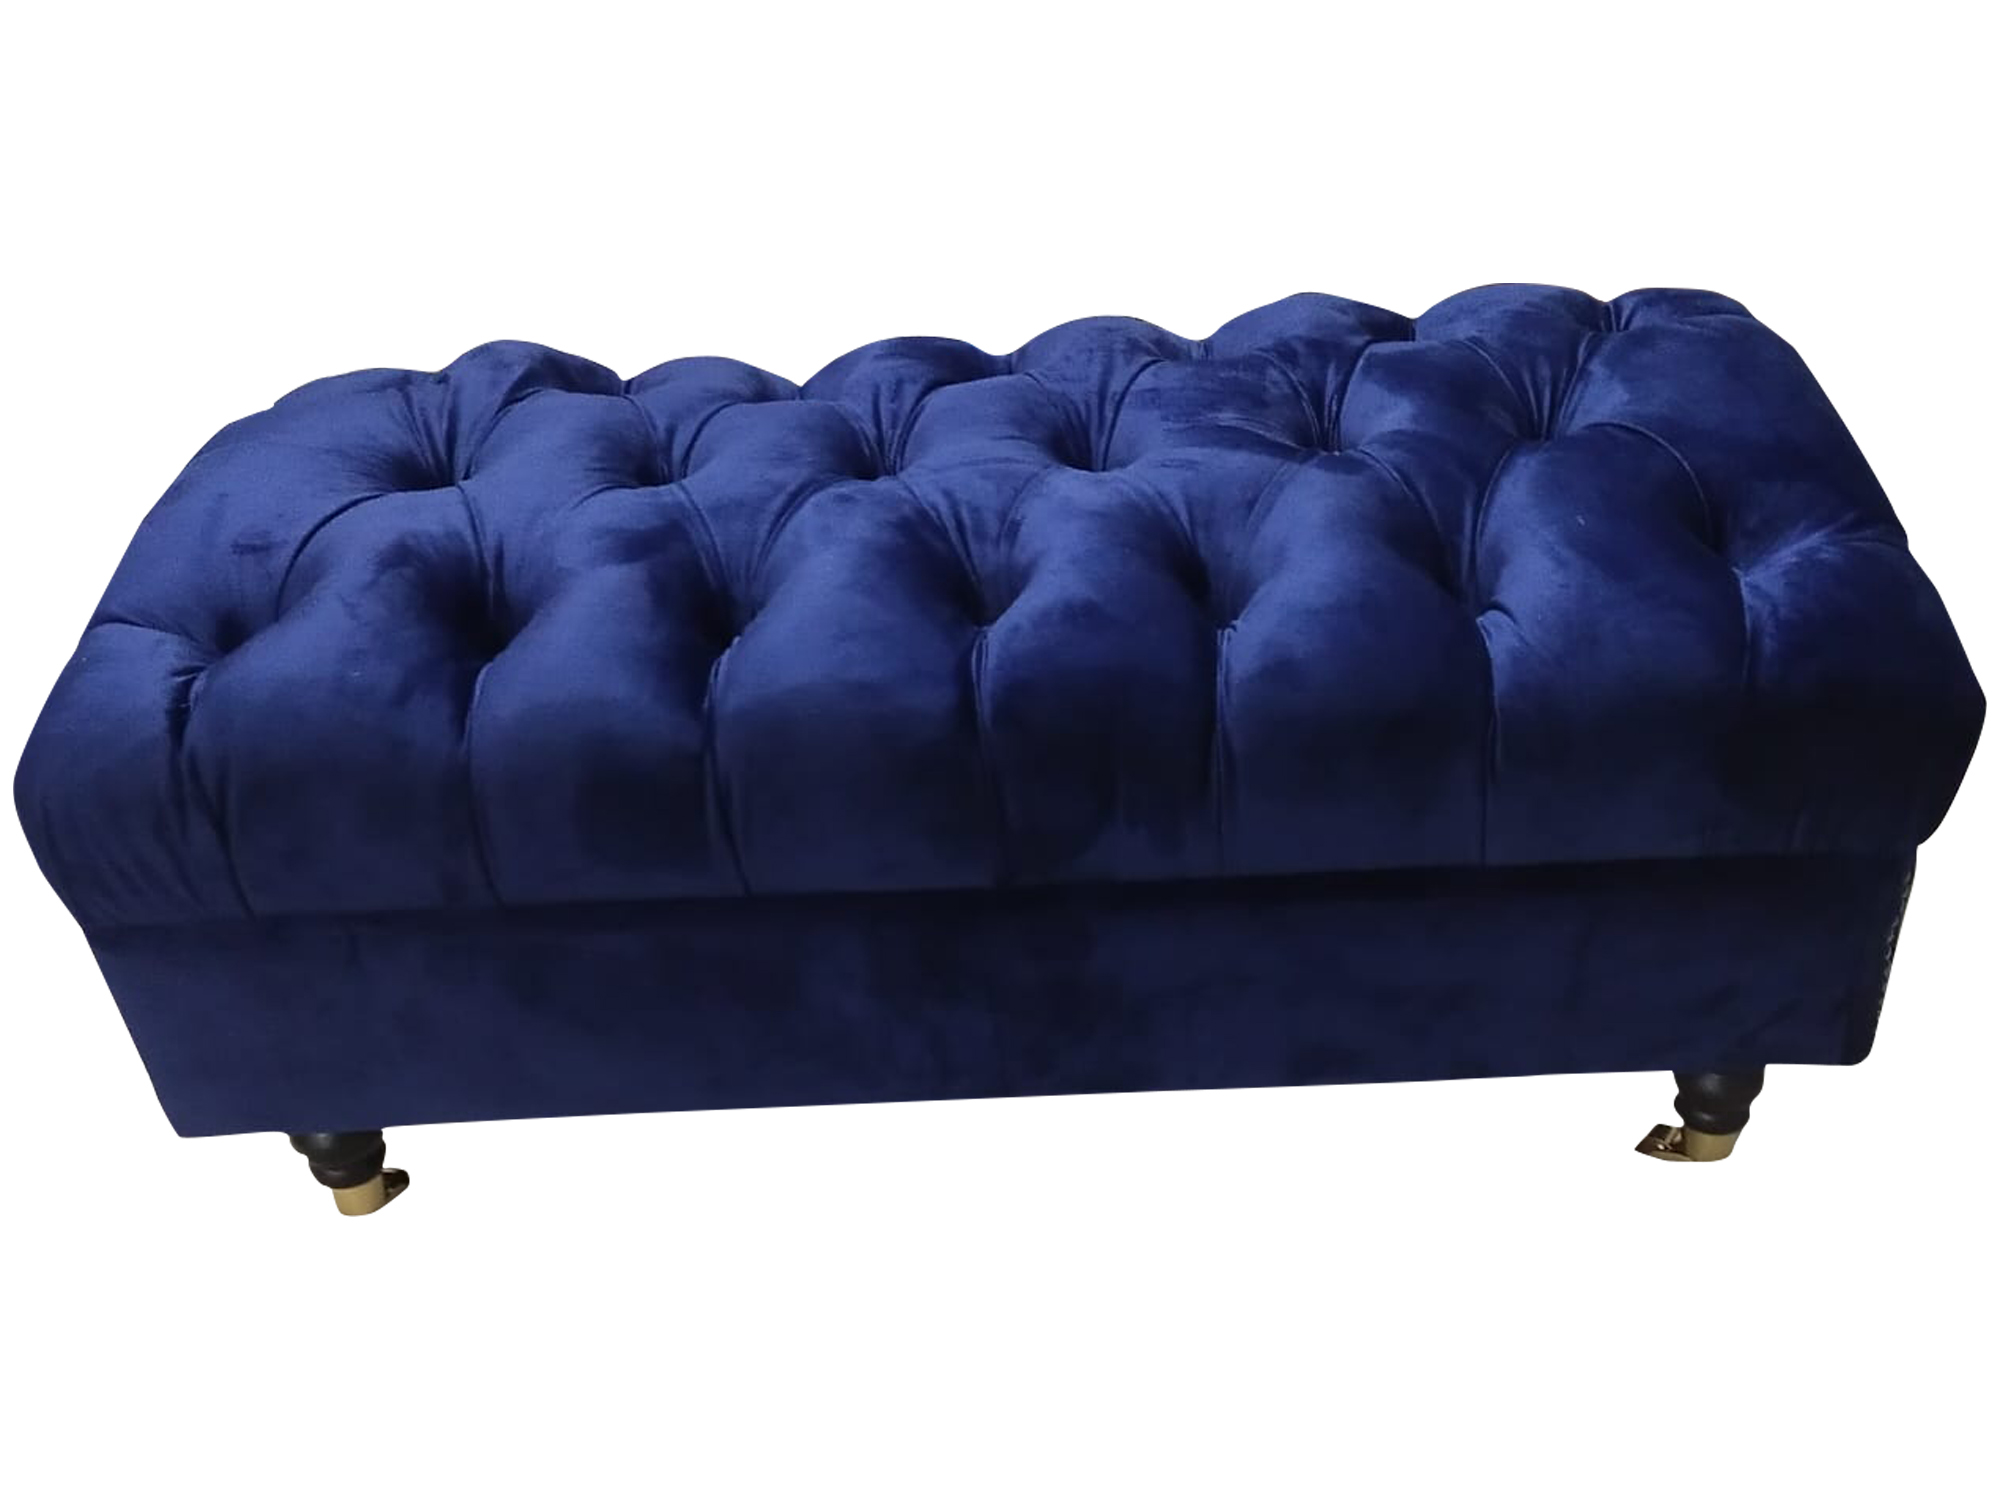 Luxury Stool Bench Design Chesterfield Relax Stool Modern Seat Footstool